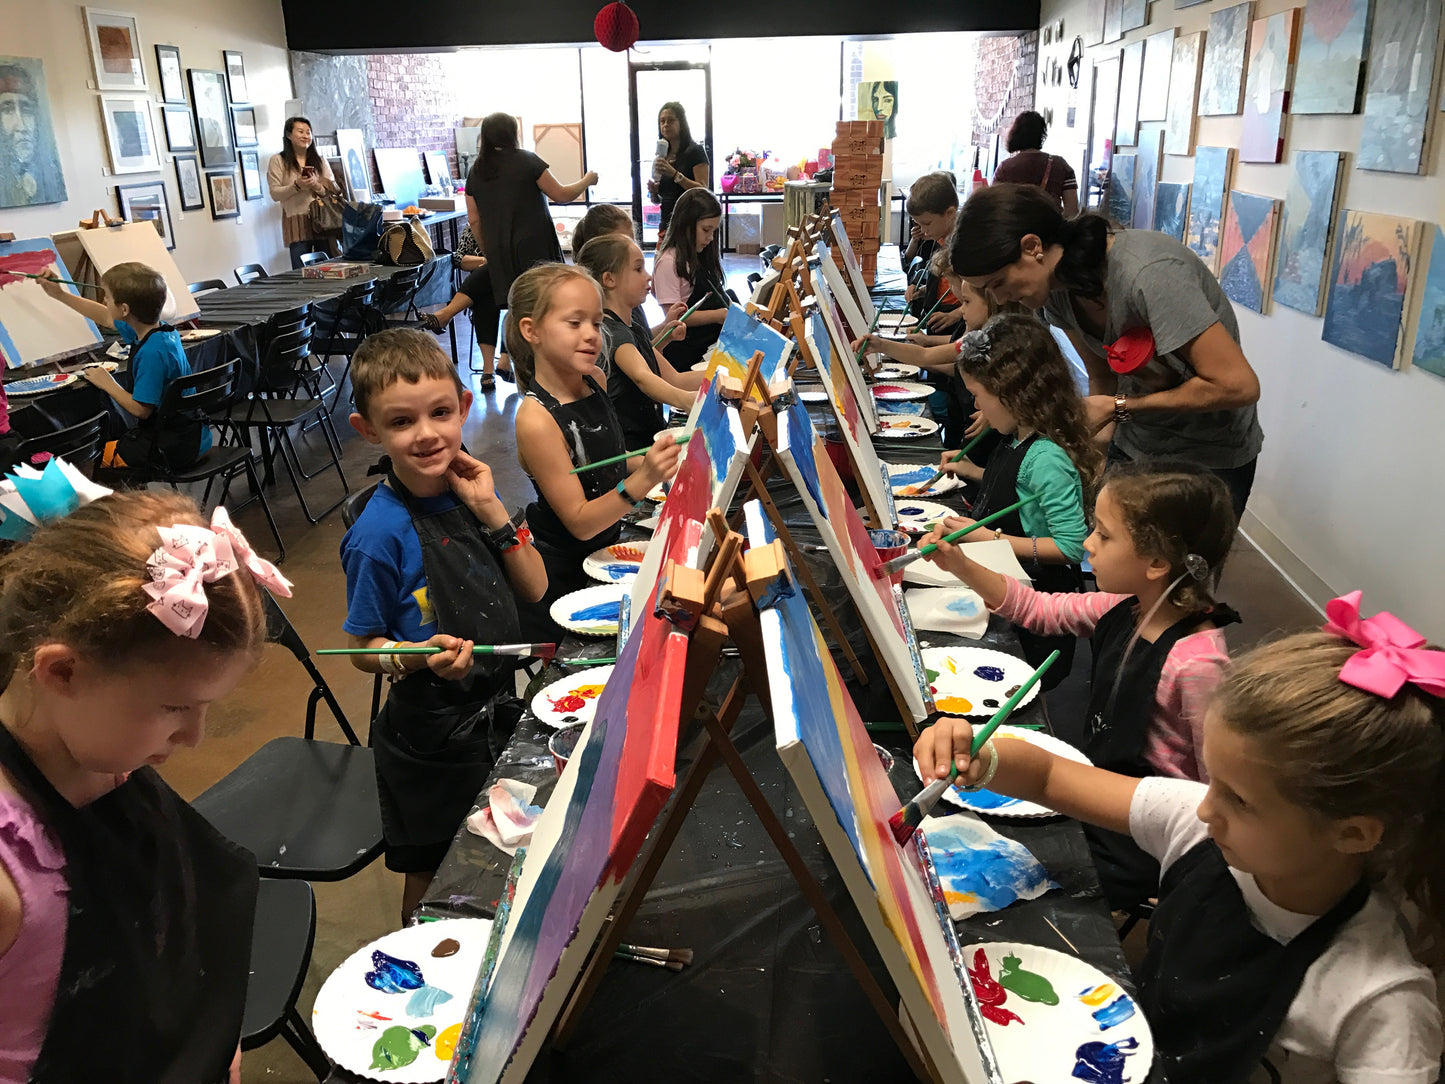 Sat, Jun 5th, 2-4pm “A Bumbling Afternoon” Private Houston Kids Painting Party